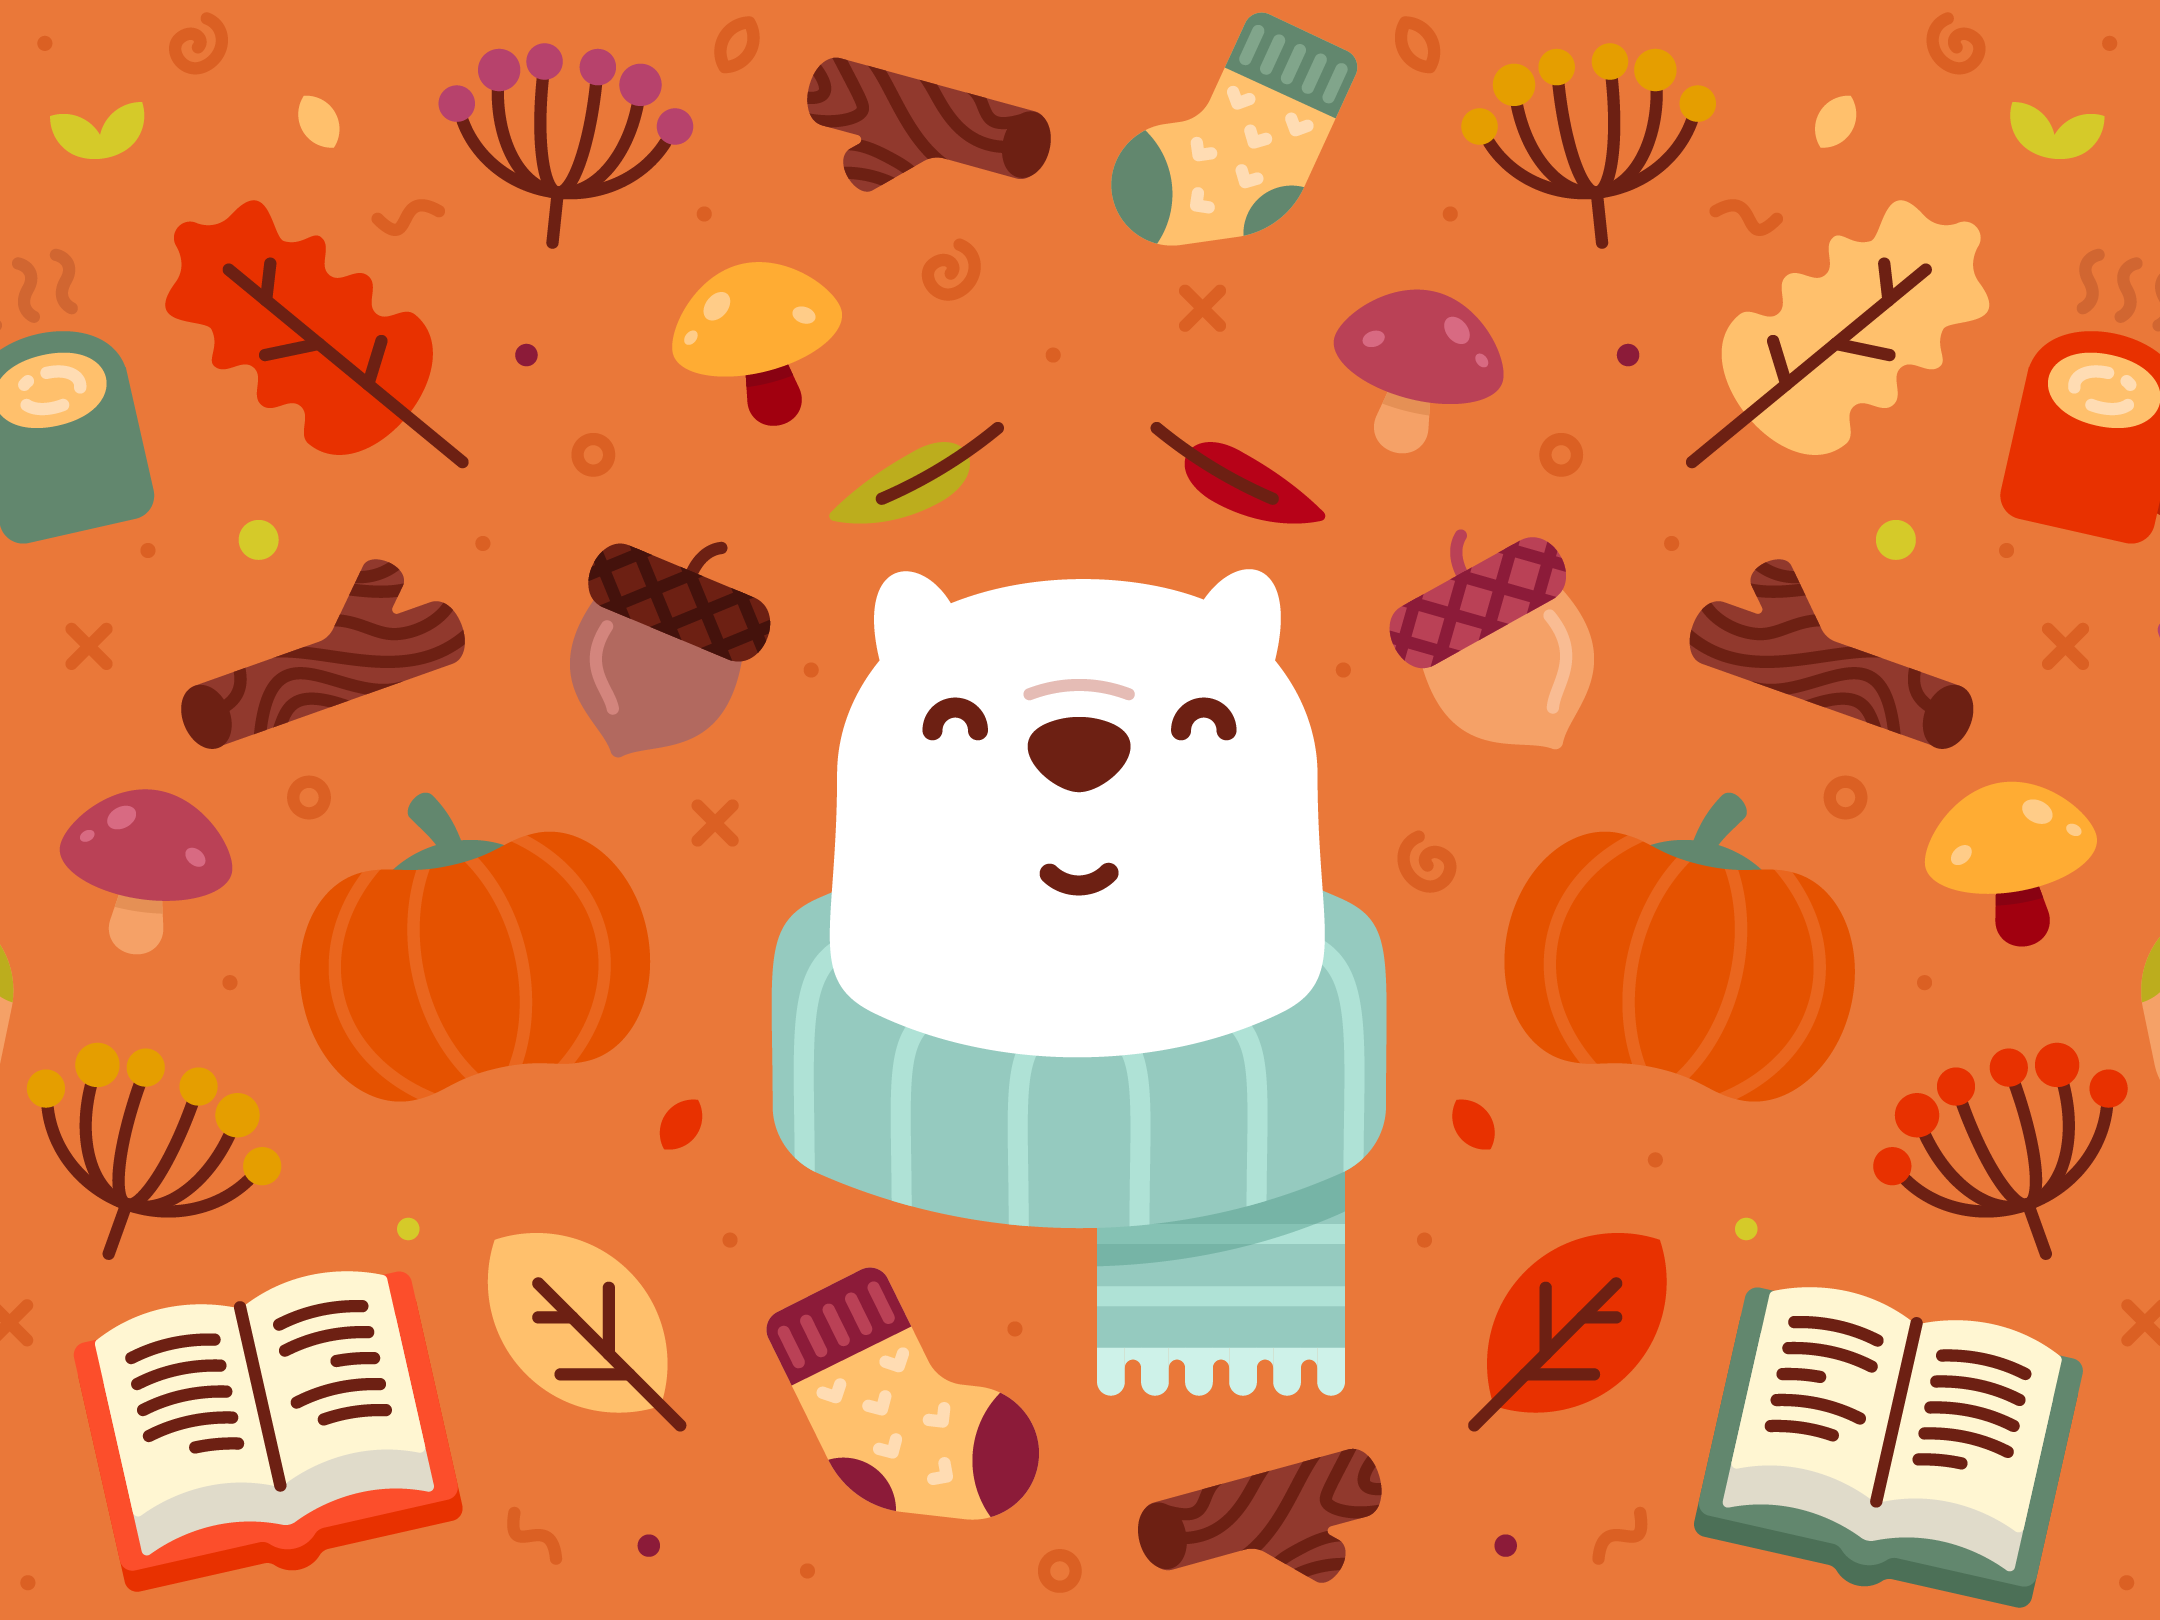 Bear Themed Wallpaper for your iPhone, iPad, and Mac